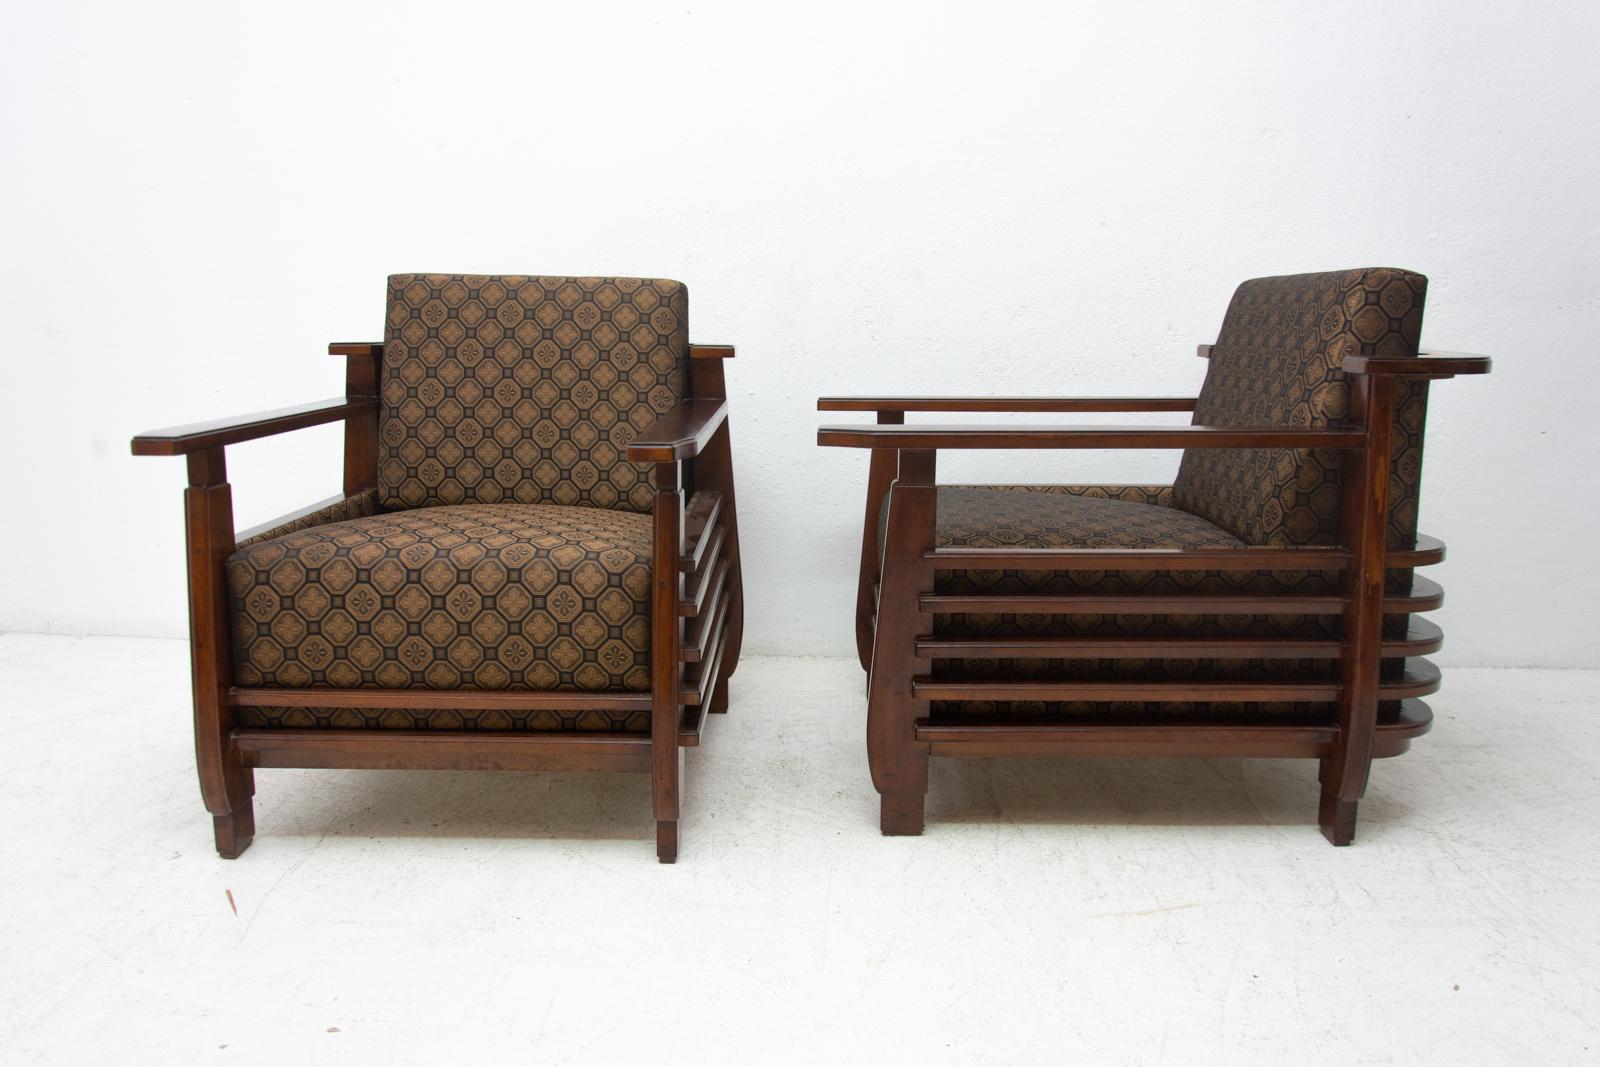 Fabric Pair of Fully Restored Functionalist Armchairs, 1930s, Austria, Bauhaus Period For Sale